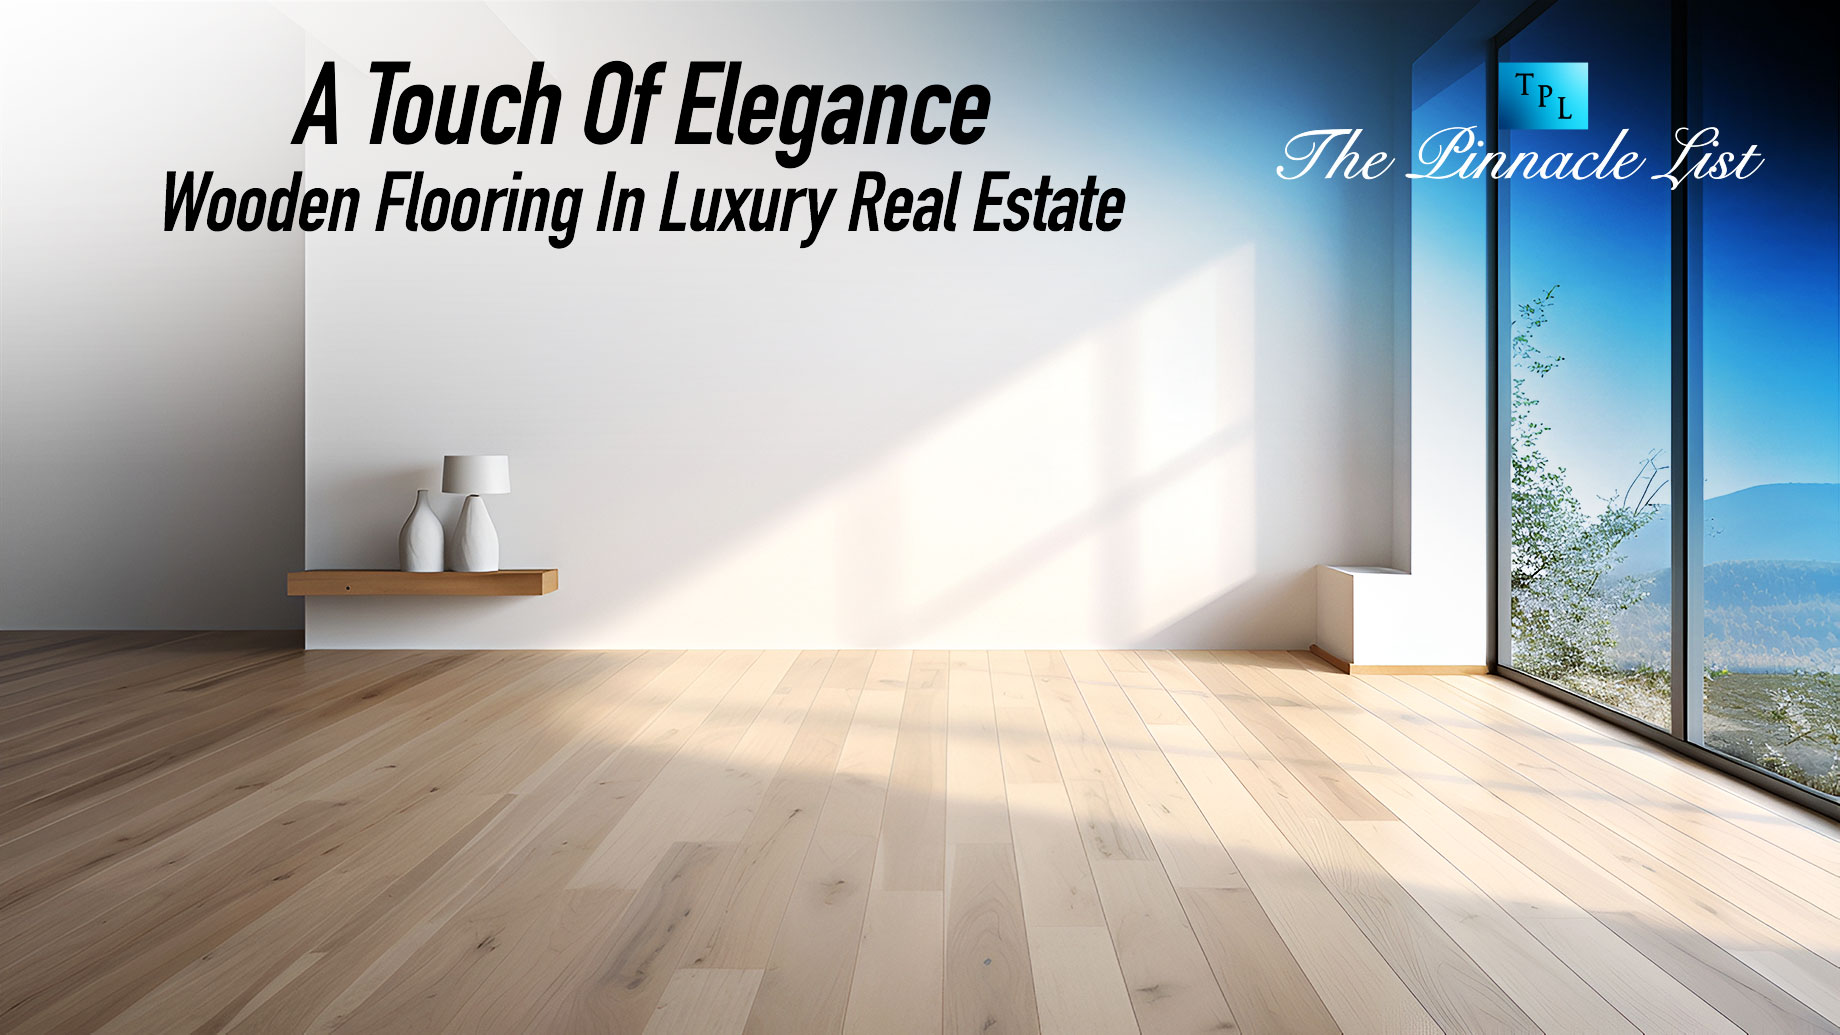 A Touch Of Elegance - Wooden Flooring In Luxury Real Estate